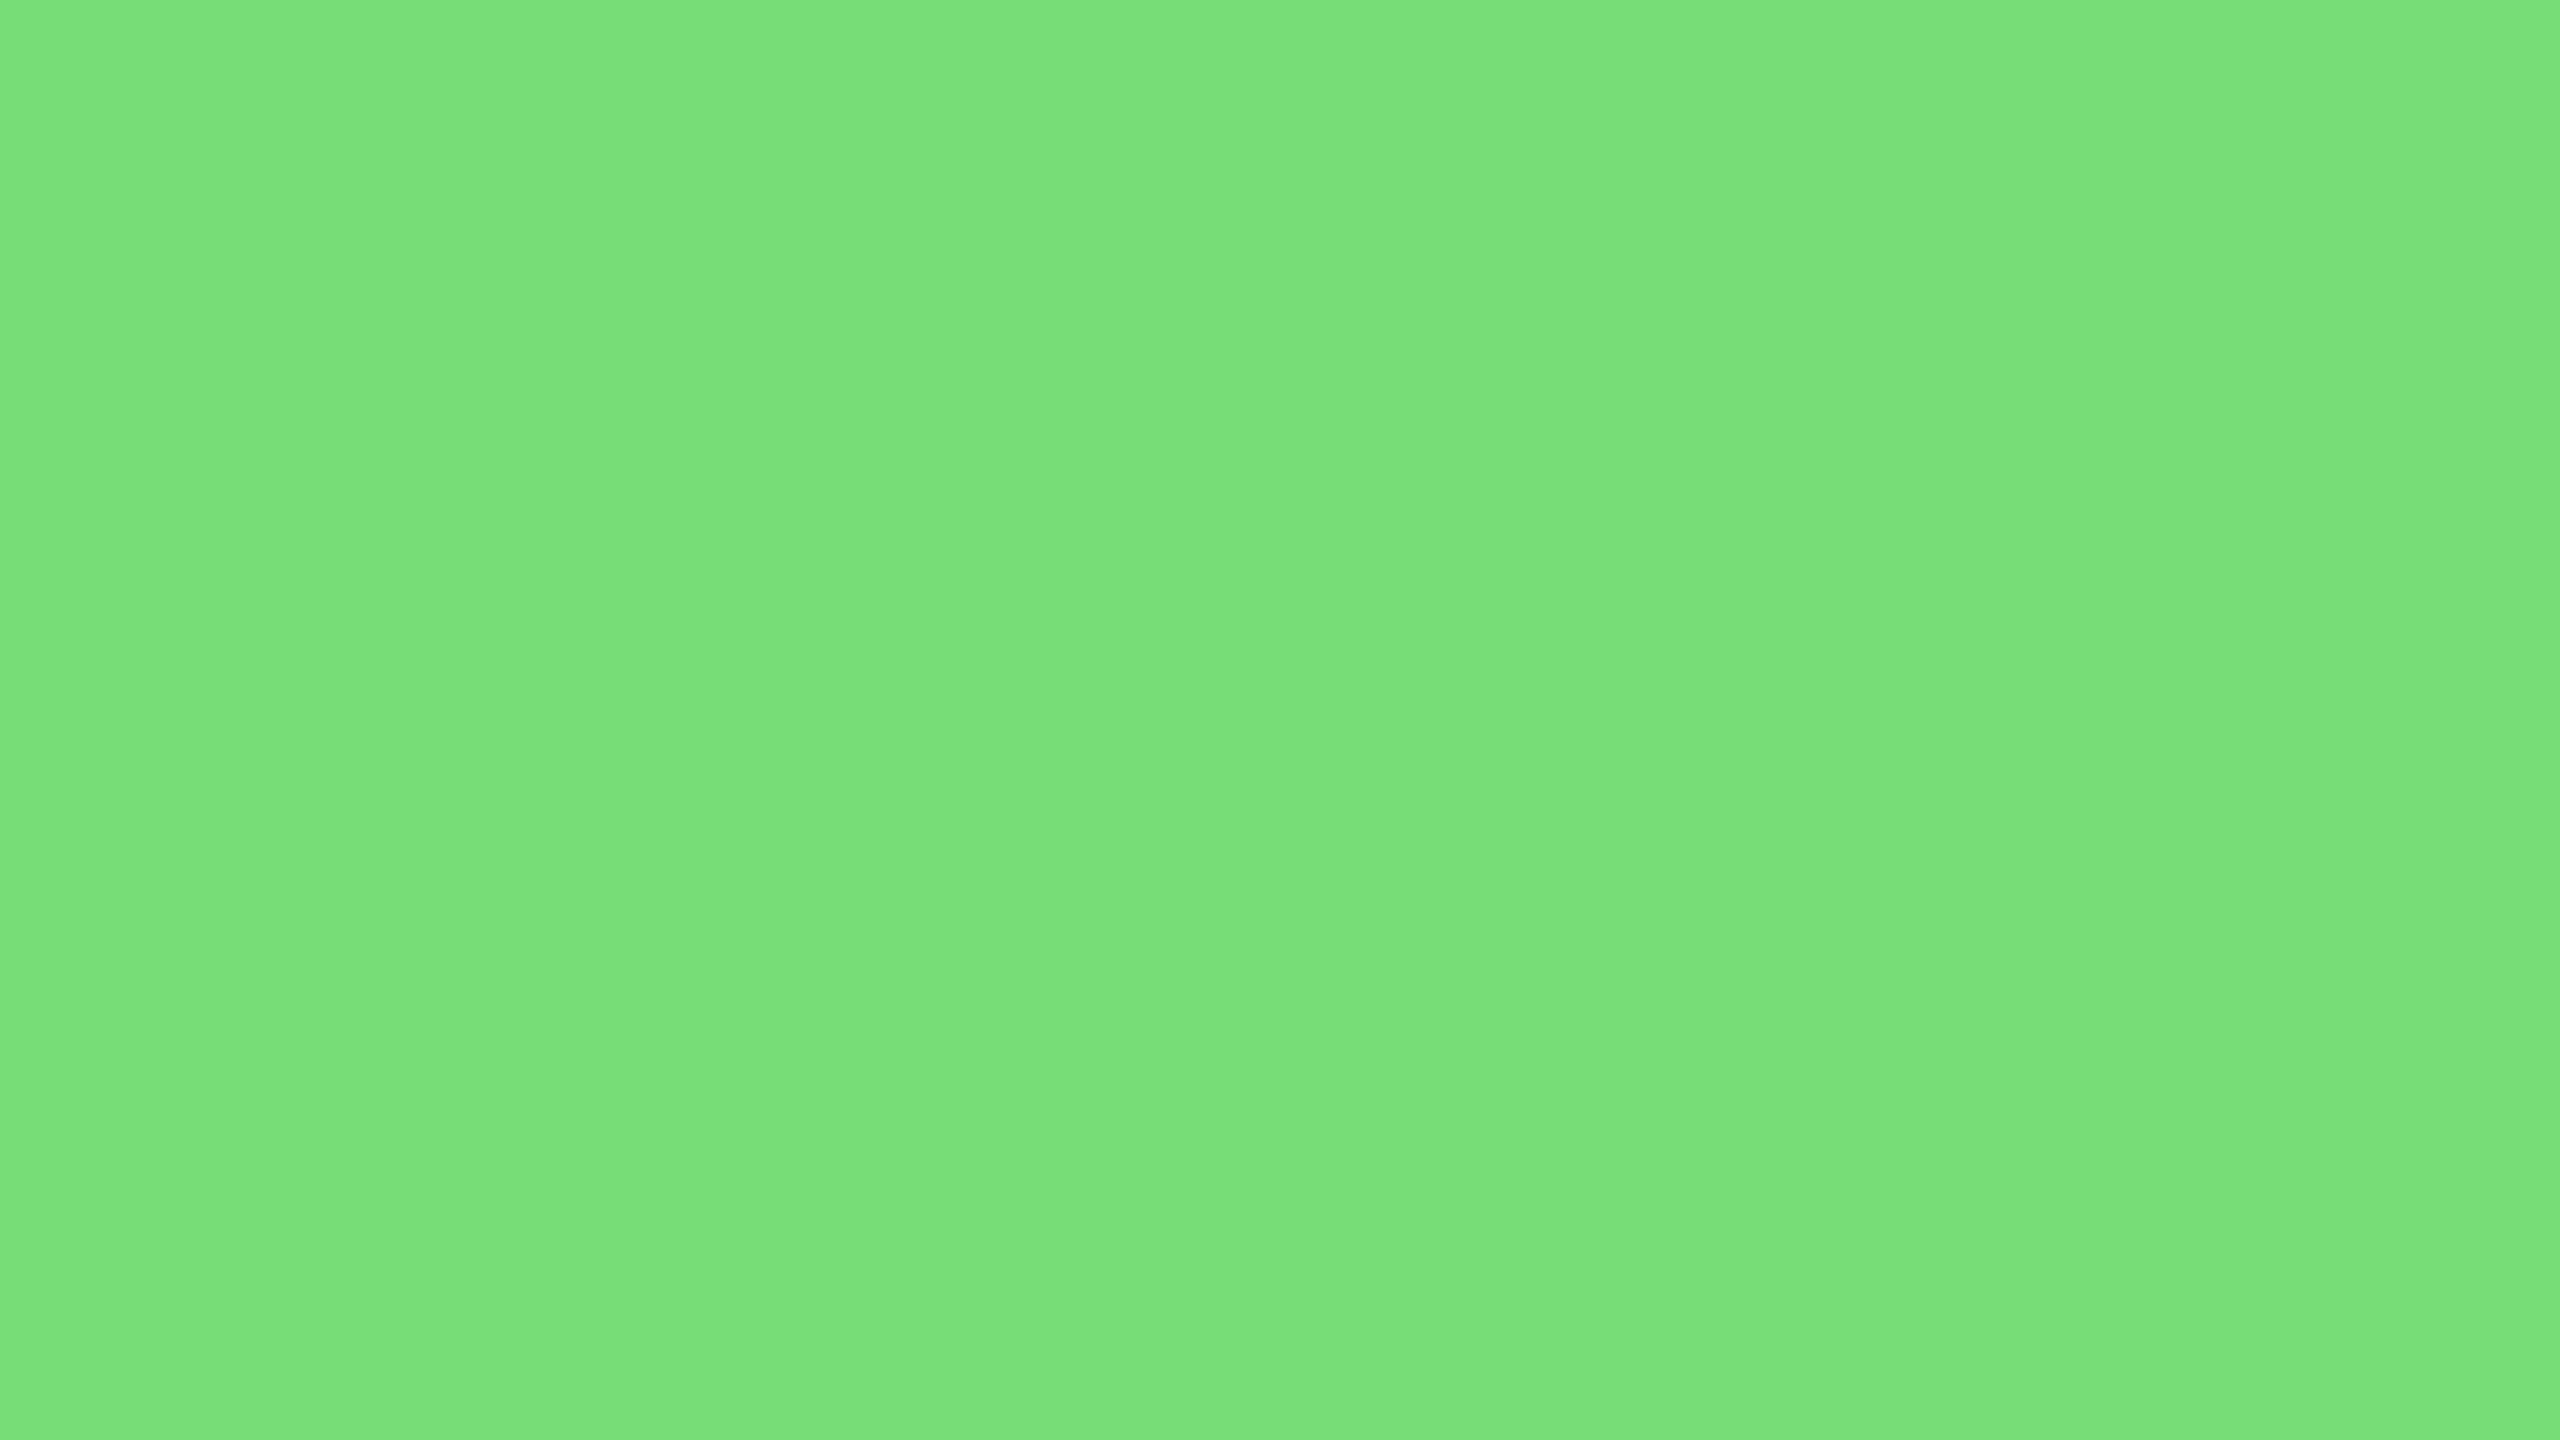 Green solid color background view and download the below background